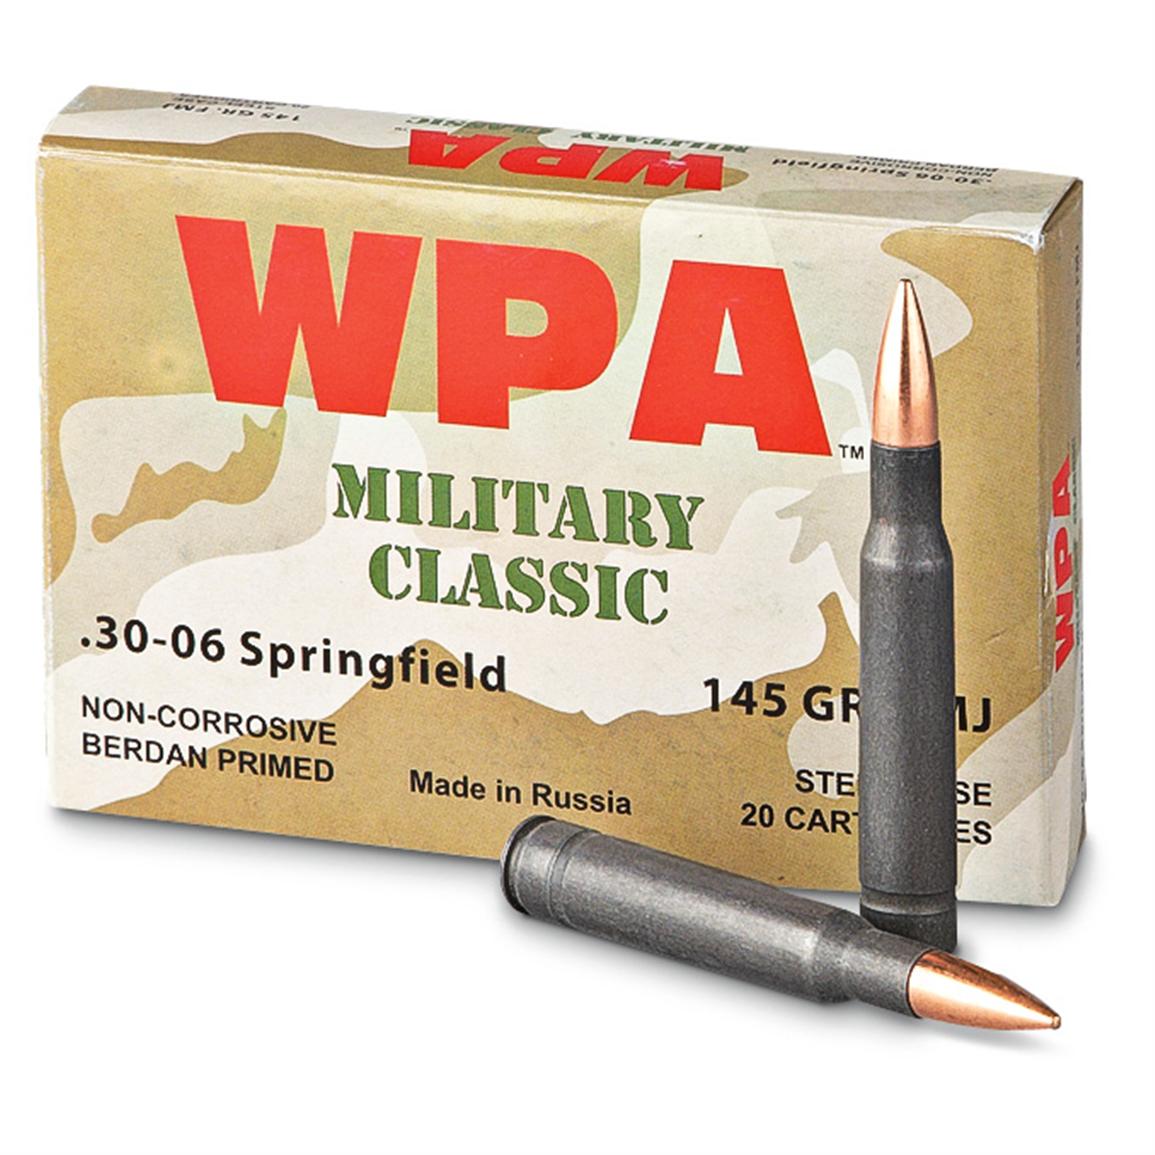 Military-style production-ready to rock your gun’s world. Item Number: 219834 Mfg. Number: MC3006FMJ145/AK UPC: 885344231217 Caliber: .30-06 Bullet Weight: 145 grain Bullet Style: FMJ Muzzle Velocity: 2,781 F.P.S. Muzzle Energy: 2,490 ft.-lbs. Case Type: Steel Primer Type: Berdan, non-reloadable Corrosive: No Rounds: 500